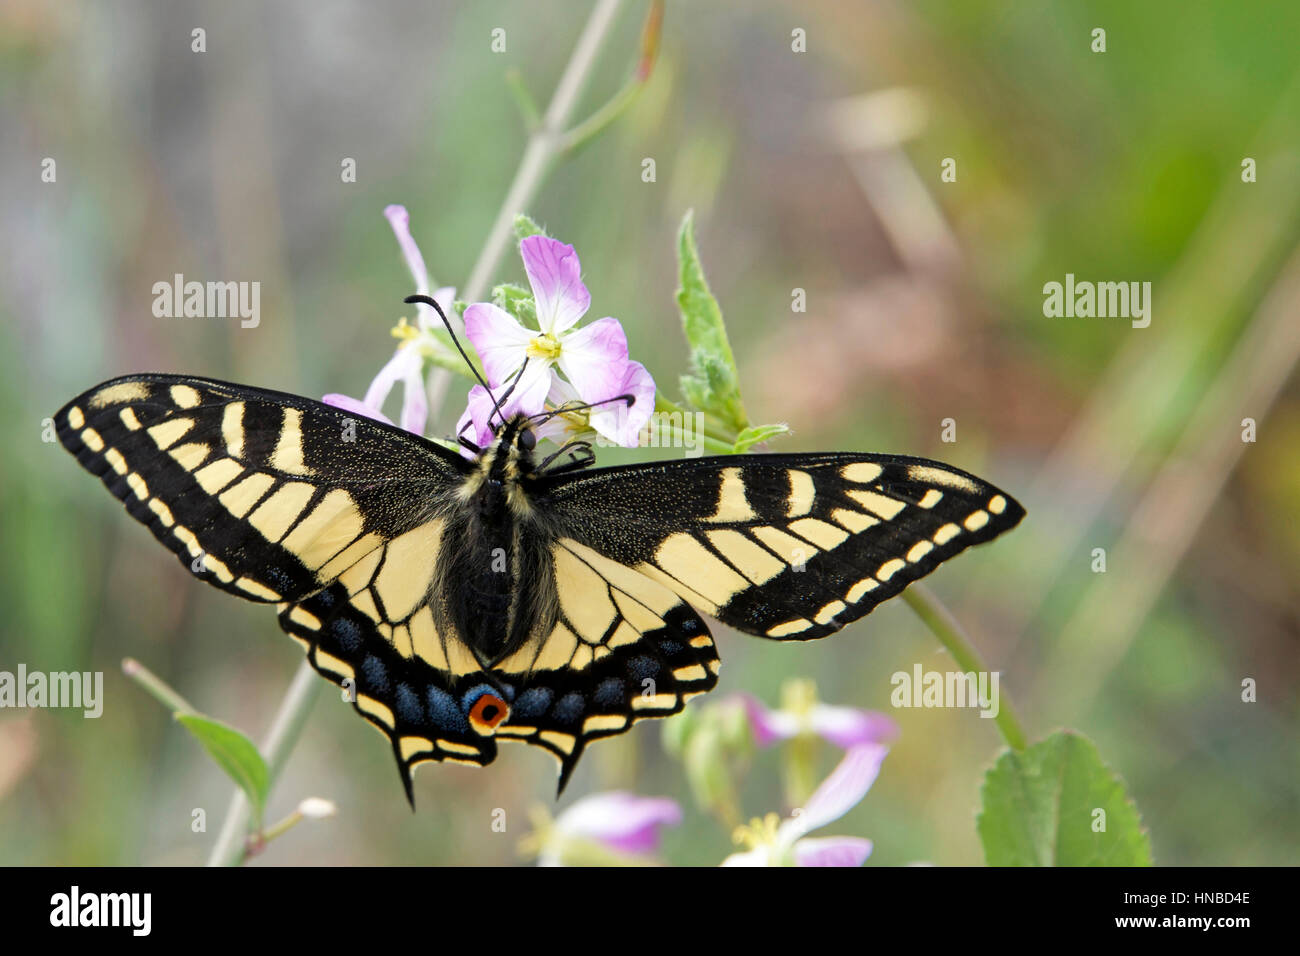 Yellow and Black Swallowtail Butterfly on pink flowers with green leaves in background Stock Photo